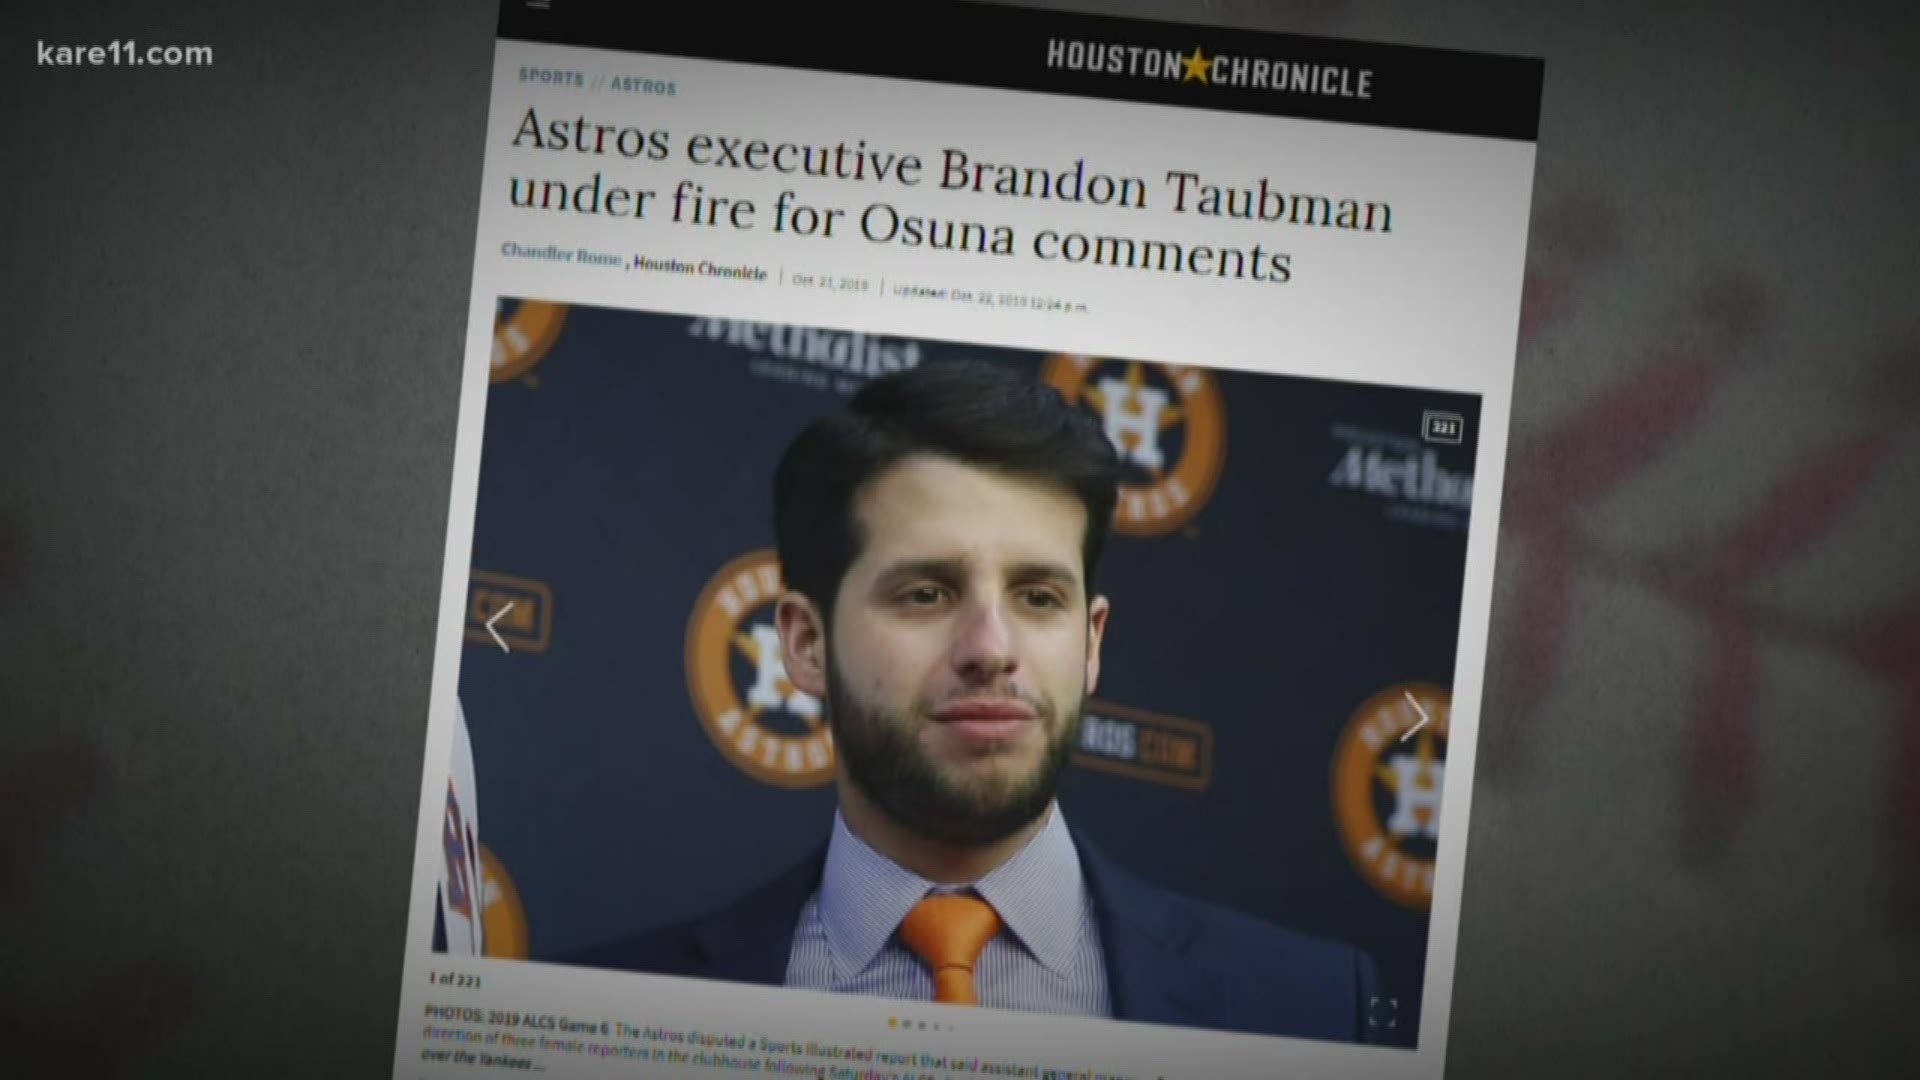 The Osuna comments were said to have been yelled, for no plausible reason, to a group of female sports reporters in the Astros' locker room.